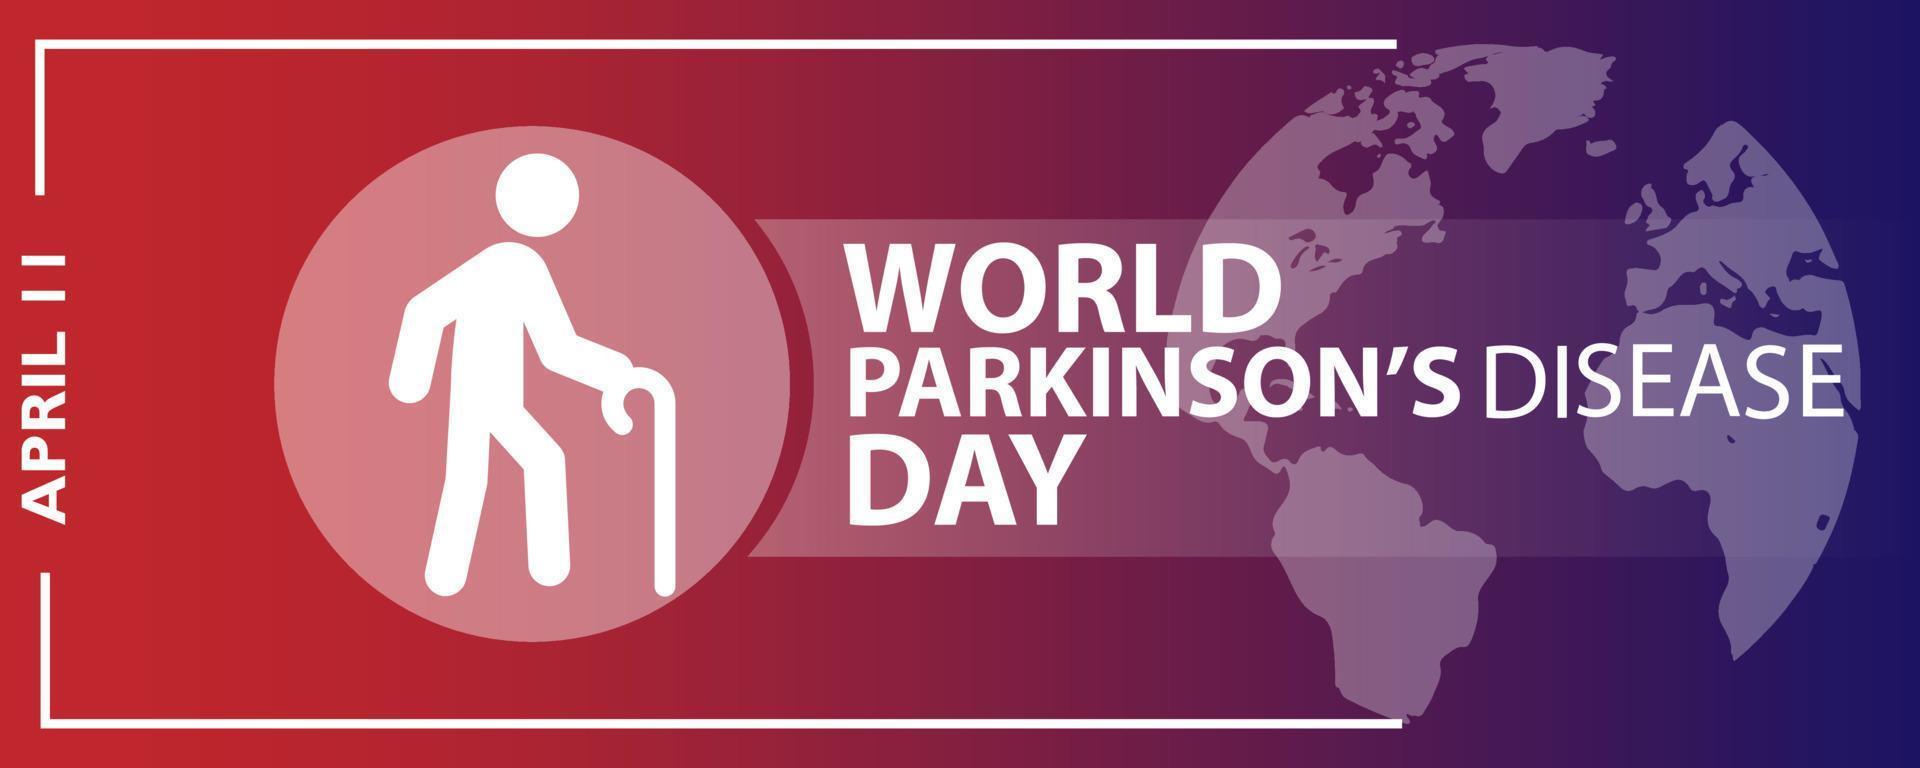 Vector illustration of World Parkinson's disease Day observed on 11th April Holiday concept. Template for background, banner, card